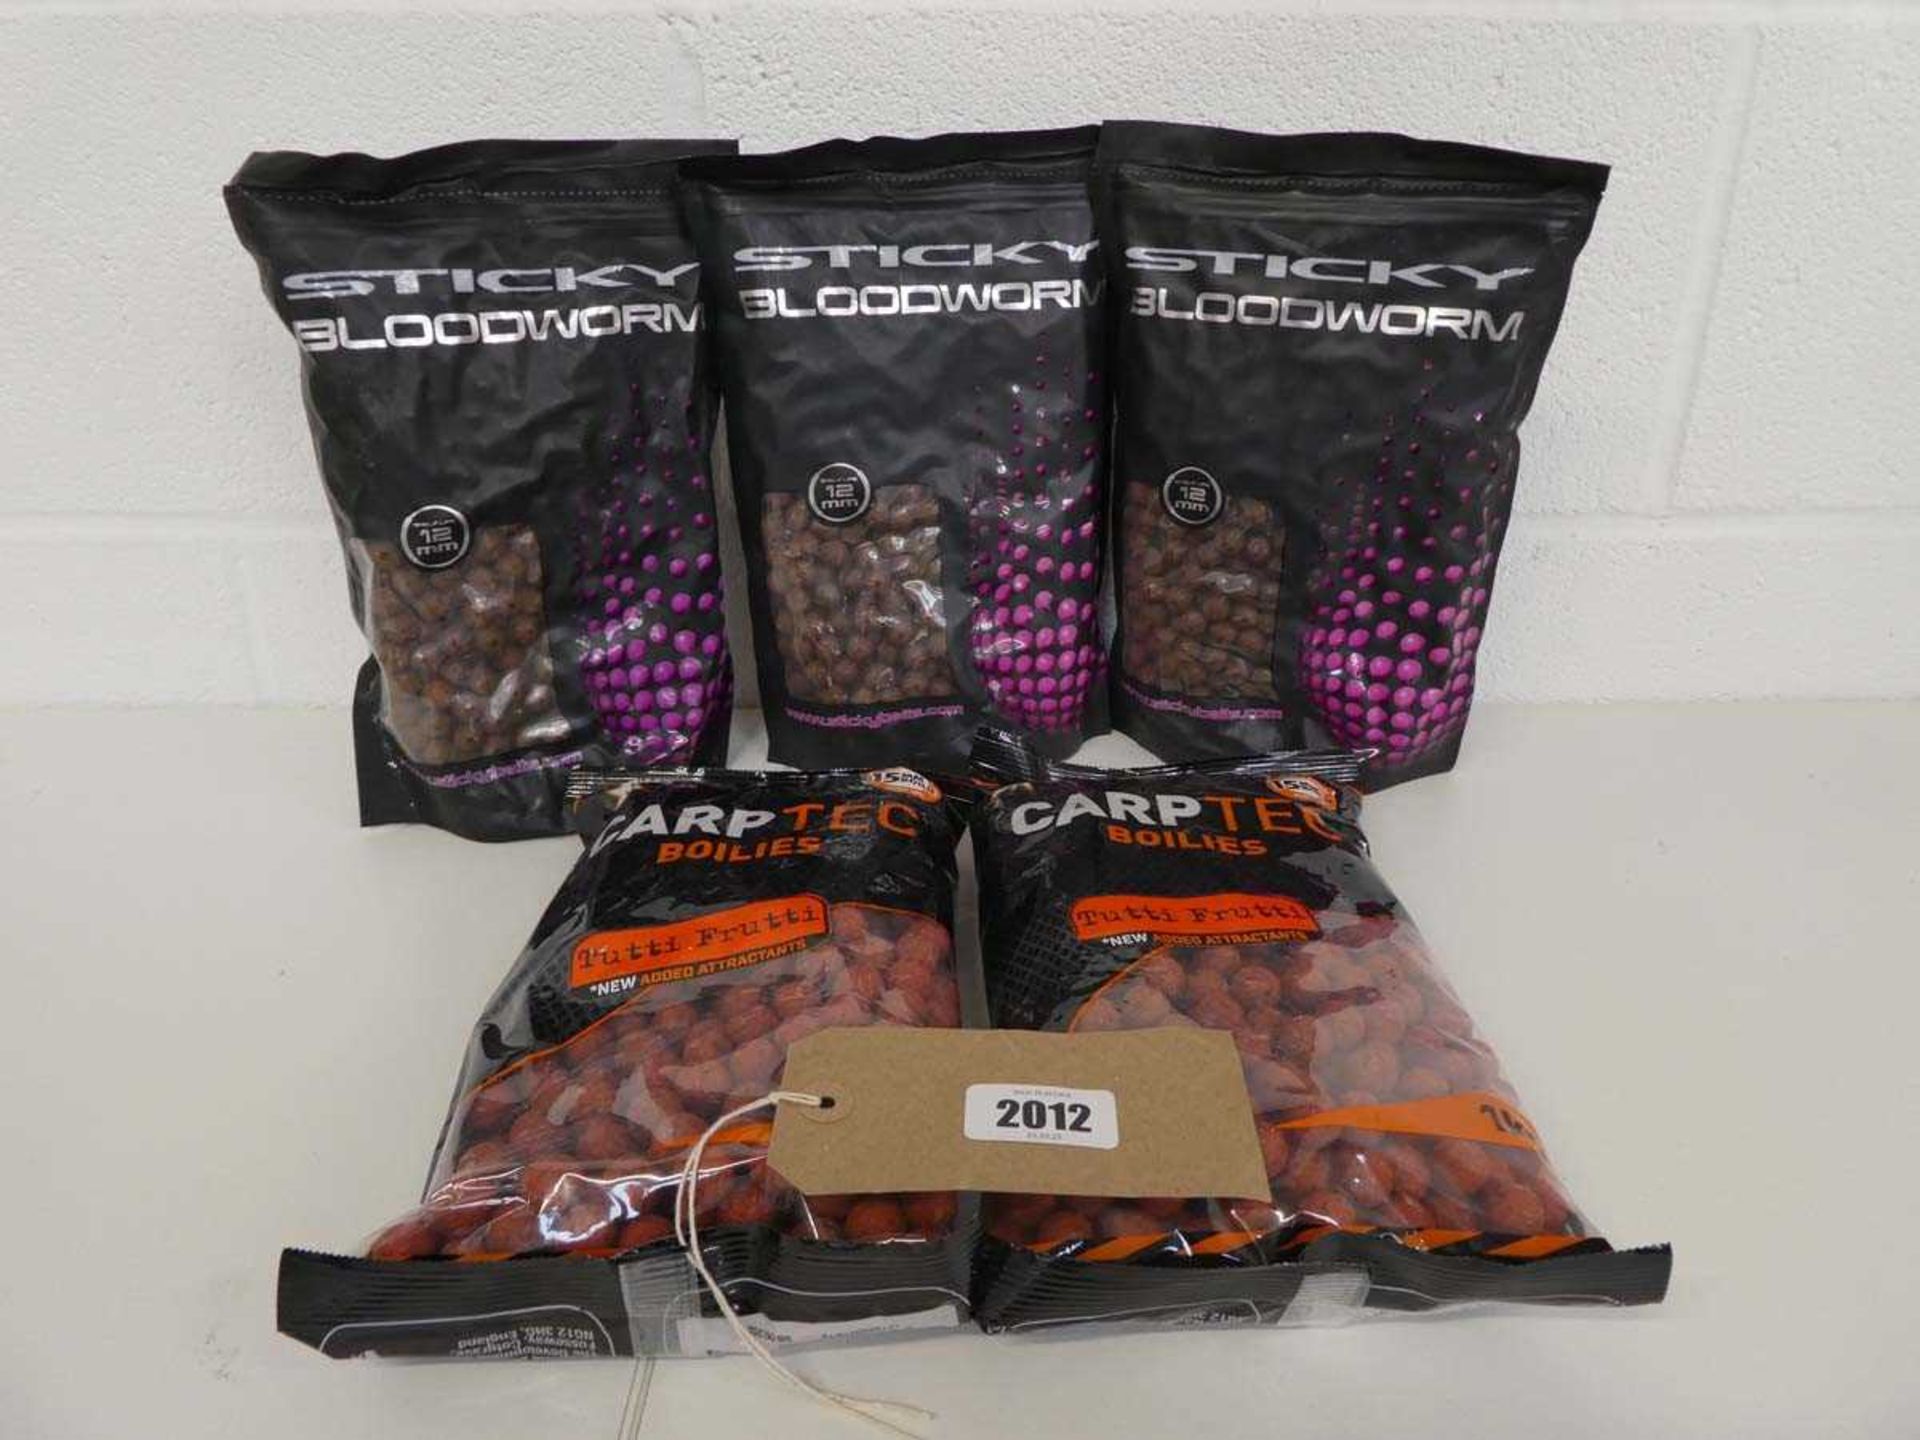 3 packs of Sticky bloodworm boilies (12mm) with 2 bags of Dynamite Carp Tec boilies in tutti-